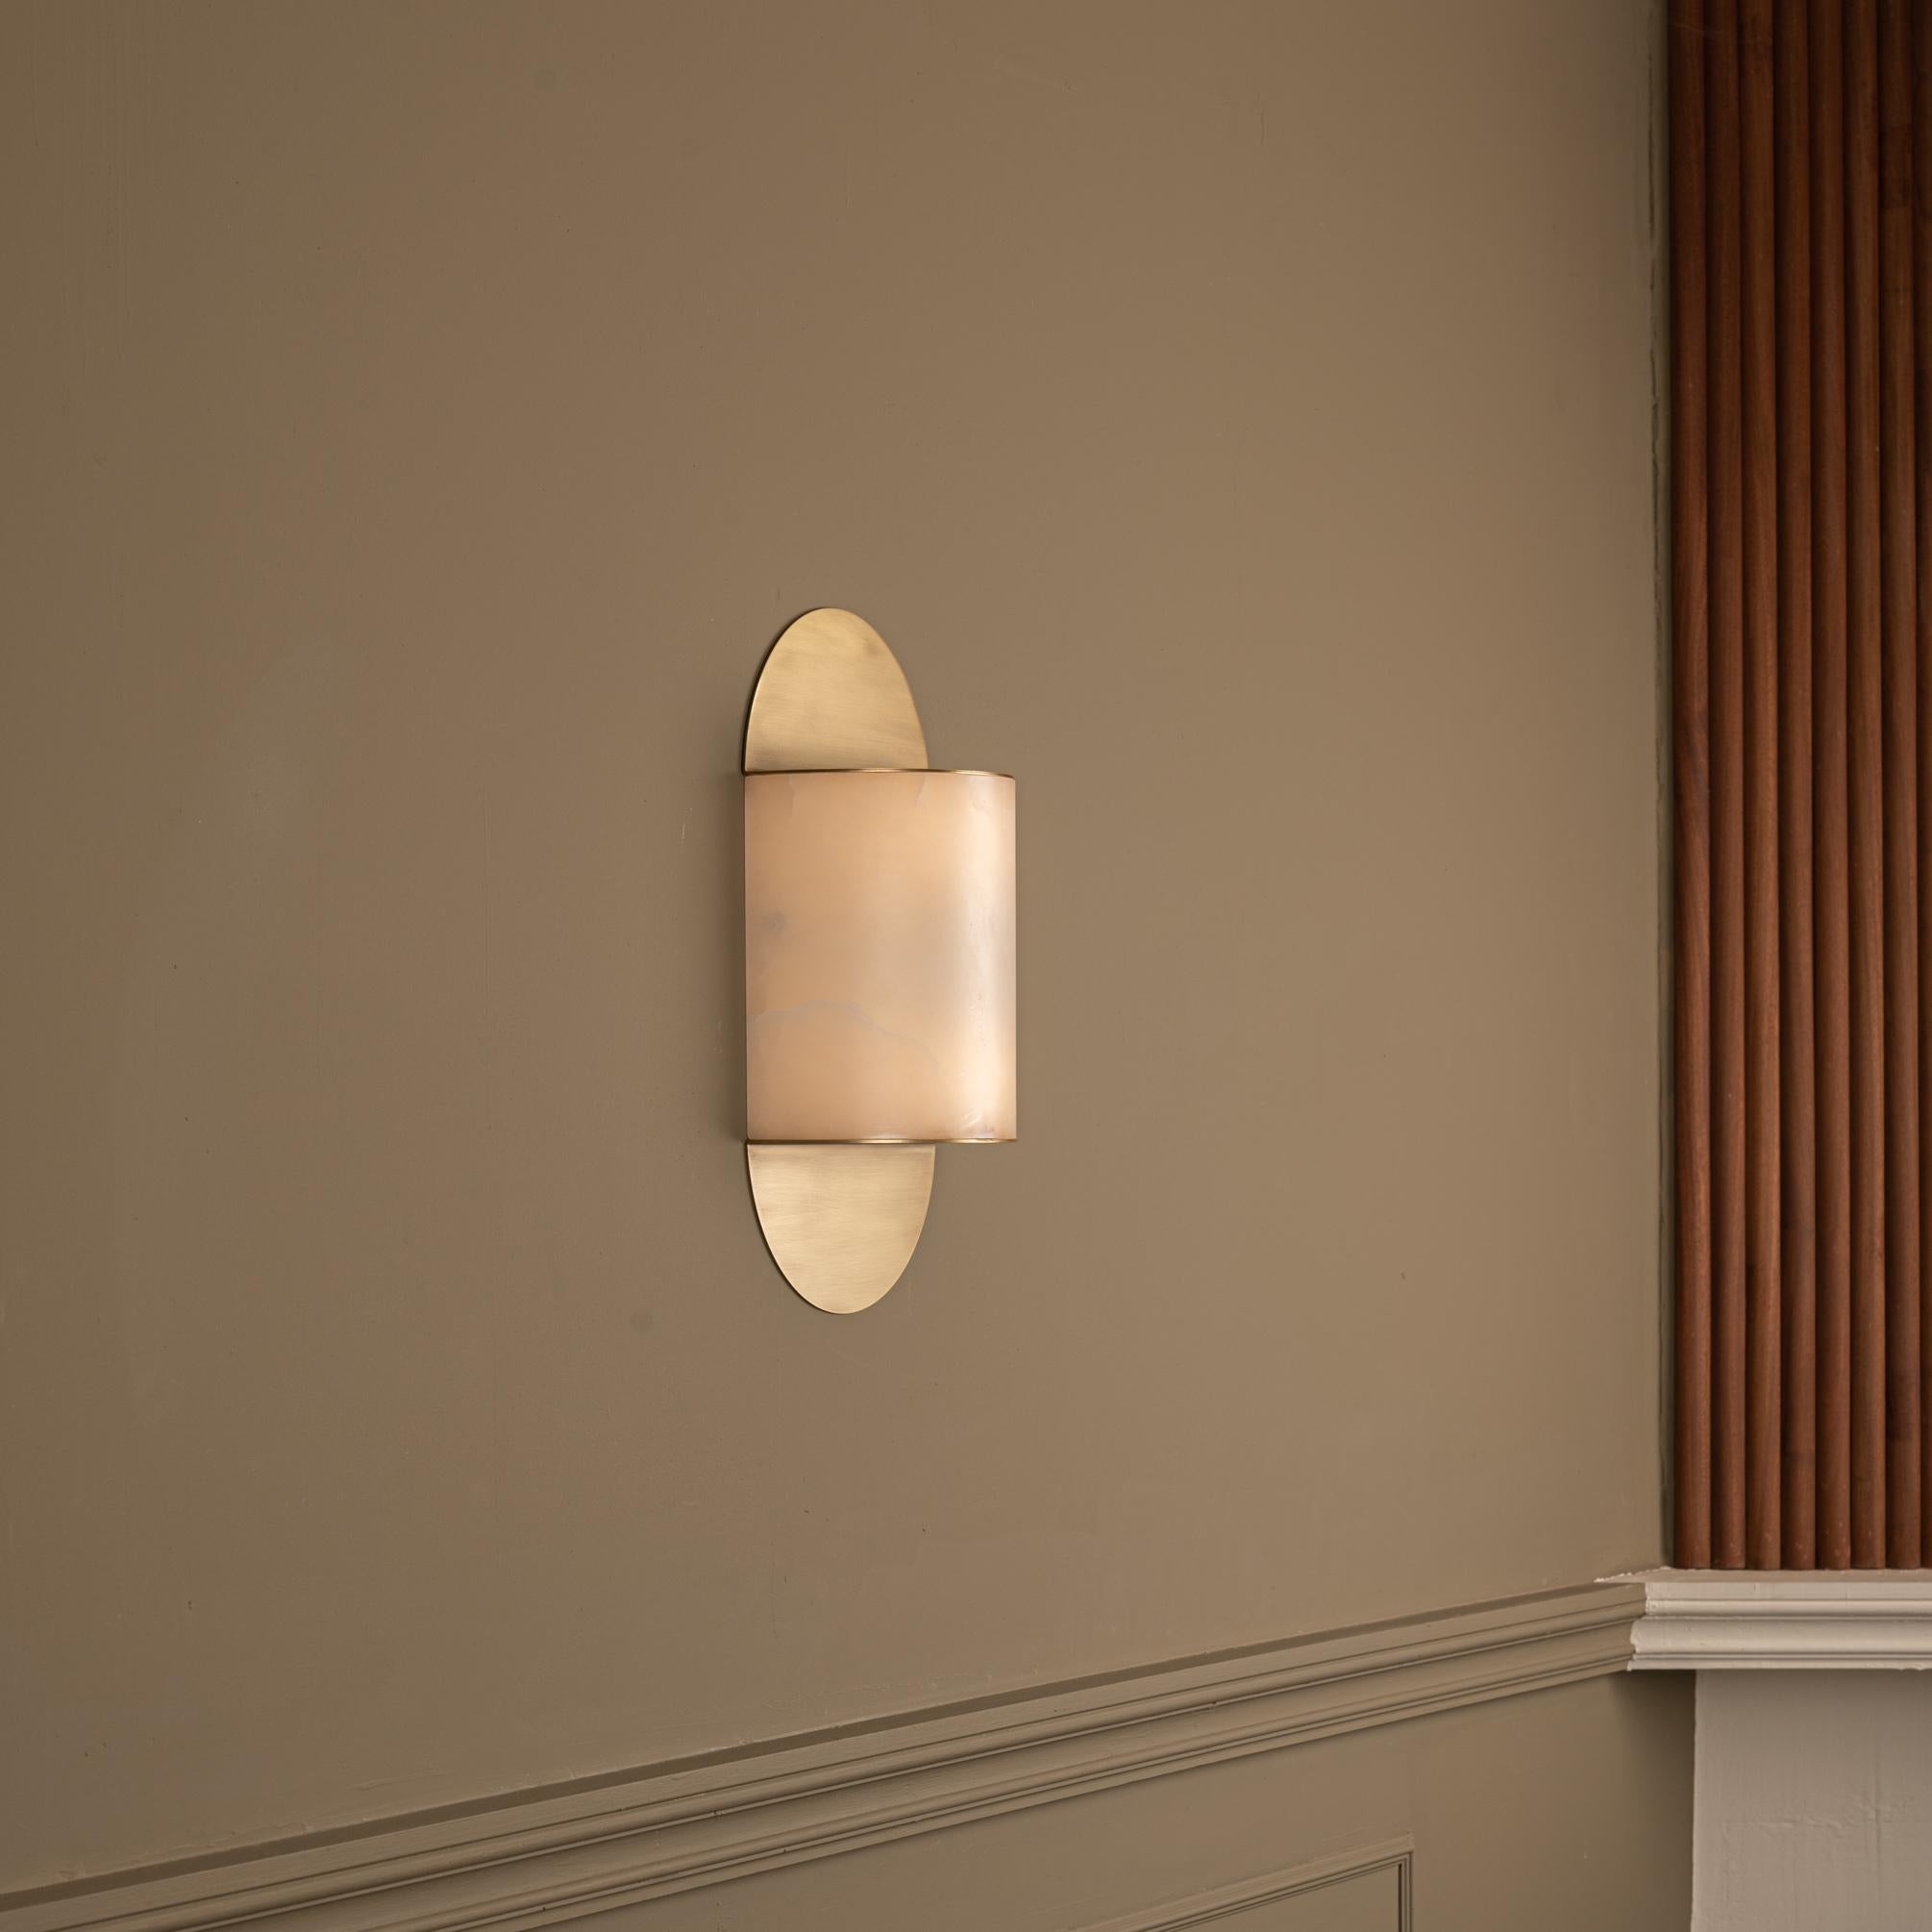 Pilolo Brass Wall Sconce by Simone & Marcel
Dimensions: D 11 x W 22 x H 42 cm.
Materials: Brass and alabaster.

Available in different brass and alabaster options and finishes. Custom options available on request. Please contact us. 

All our lamps